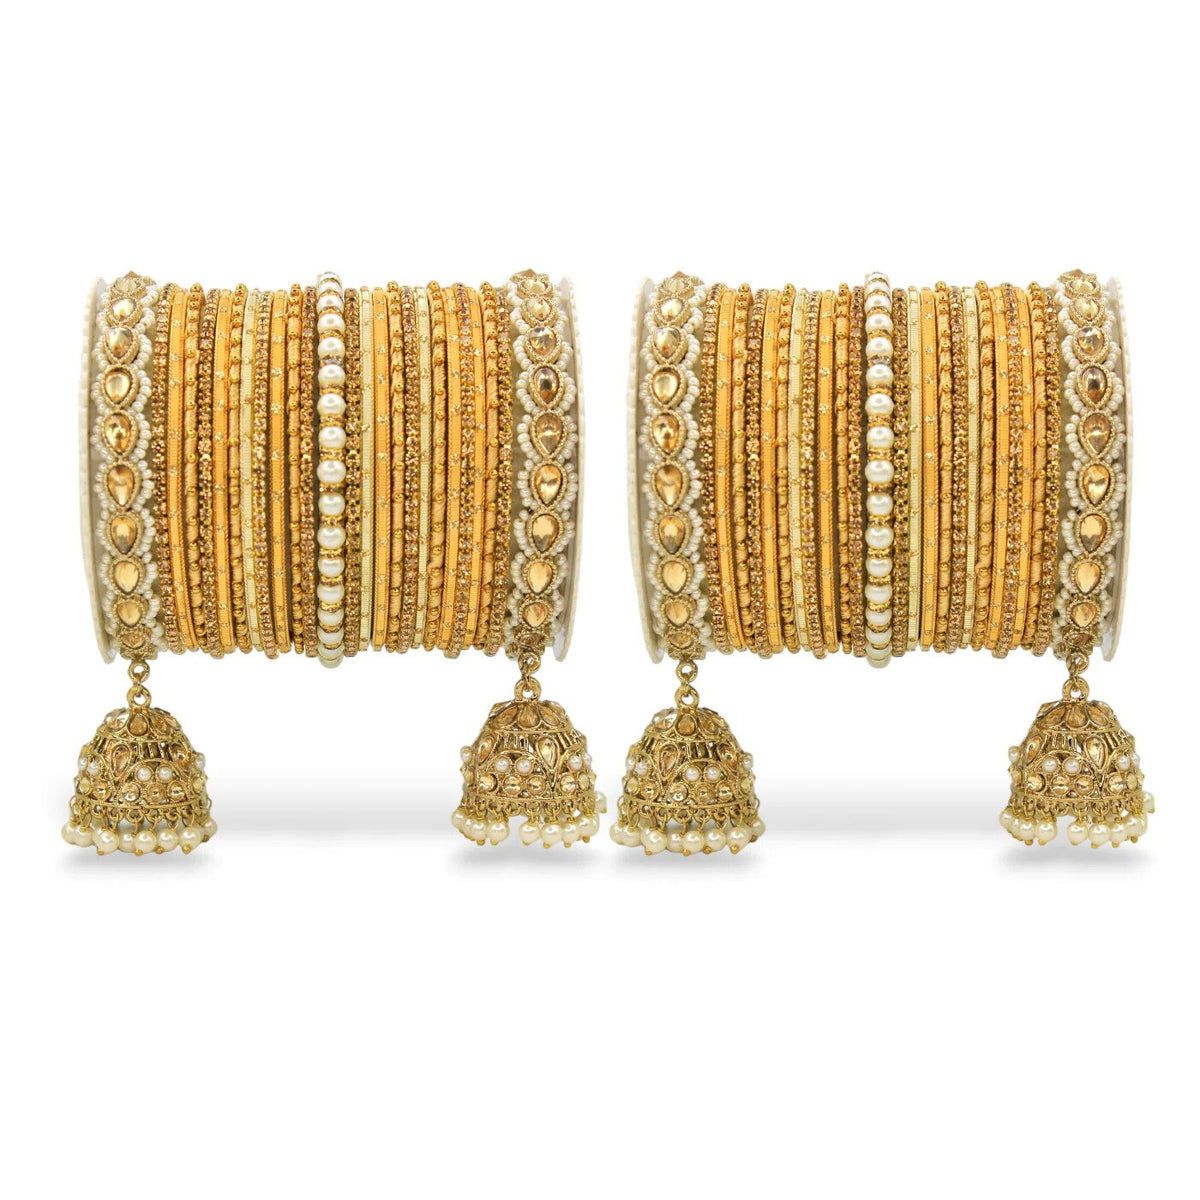 Indian Bangle Set in Different Colors Pearl Bangles Set with Jhumki Borders, Indian wedding Tassel Bangles Set Woman Jewelry Set